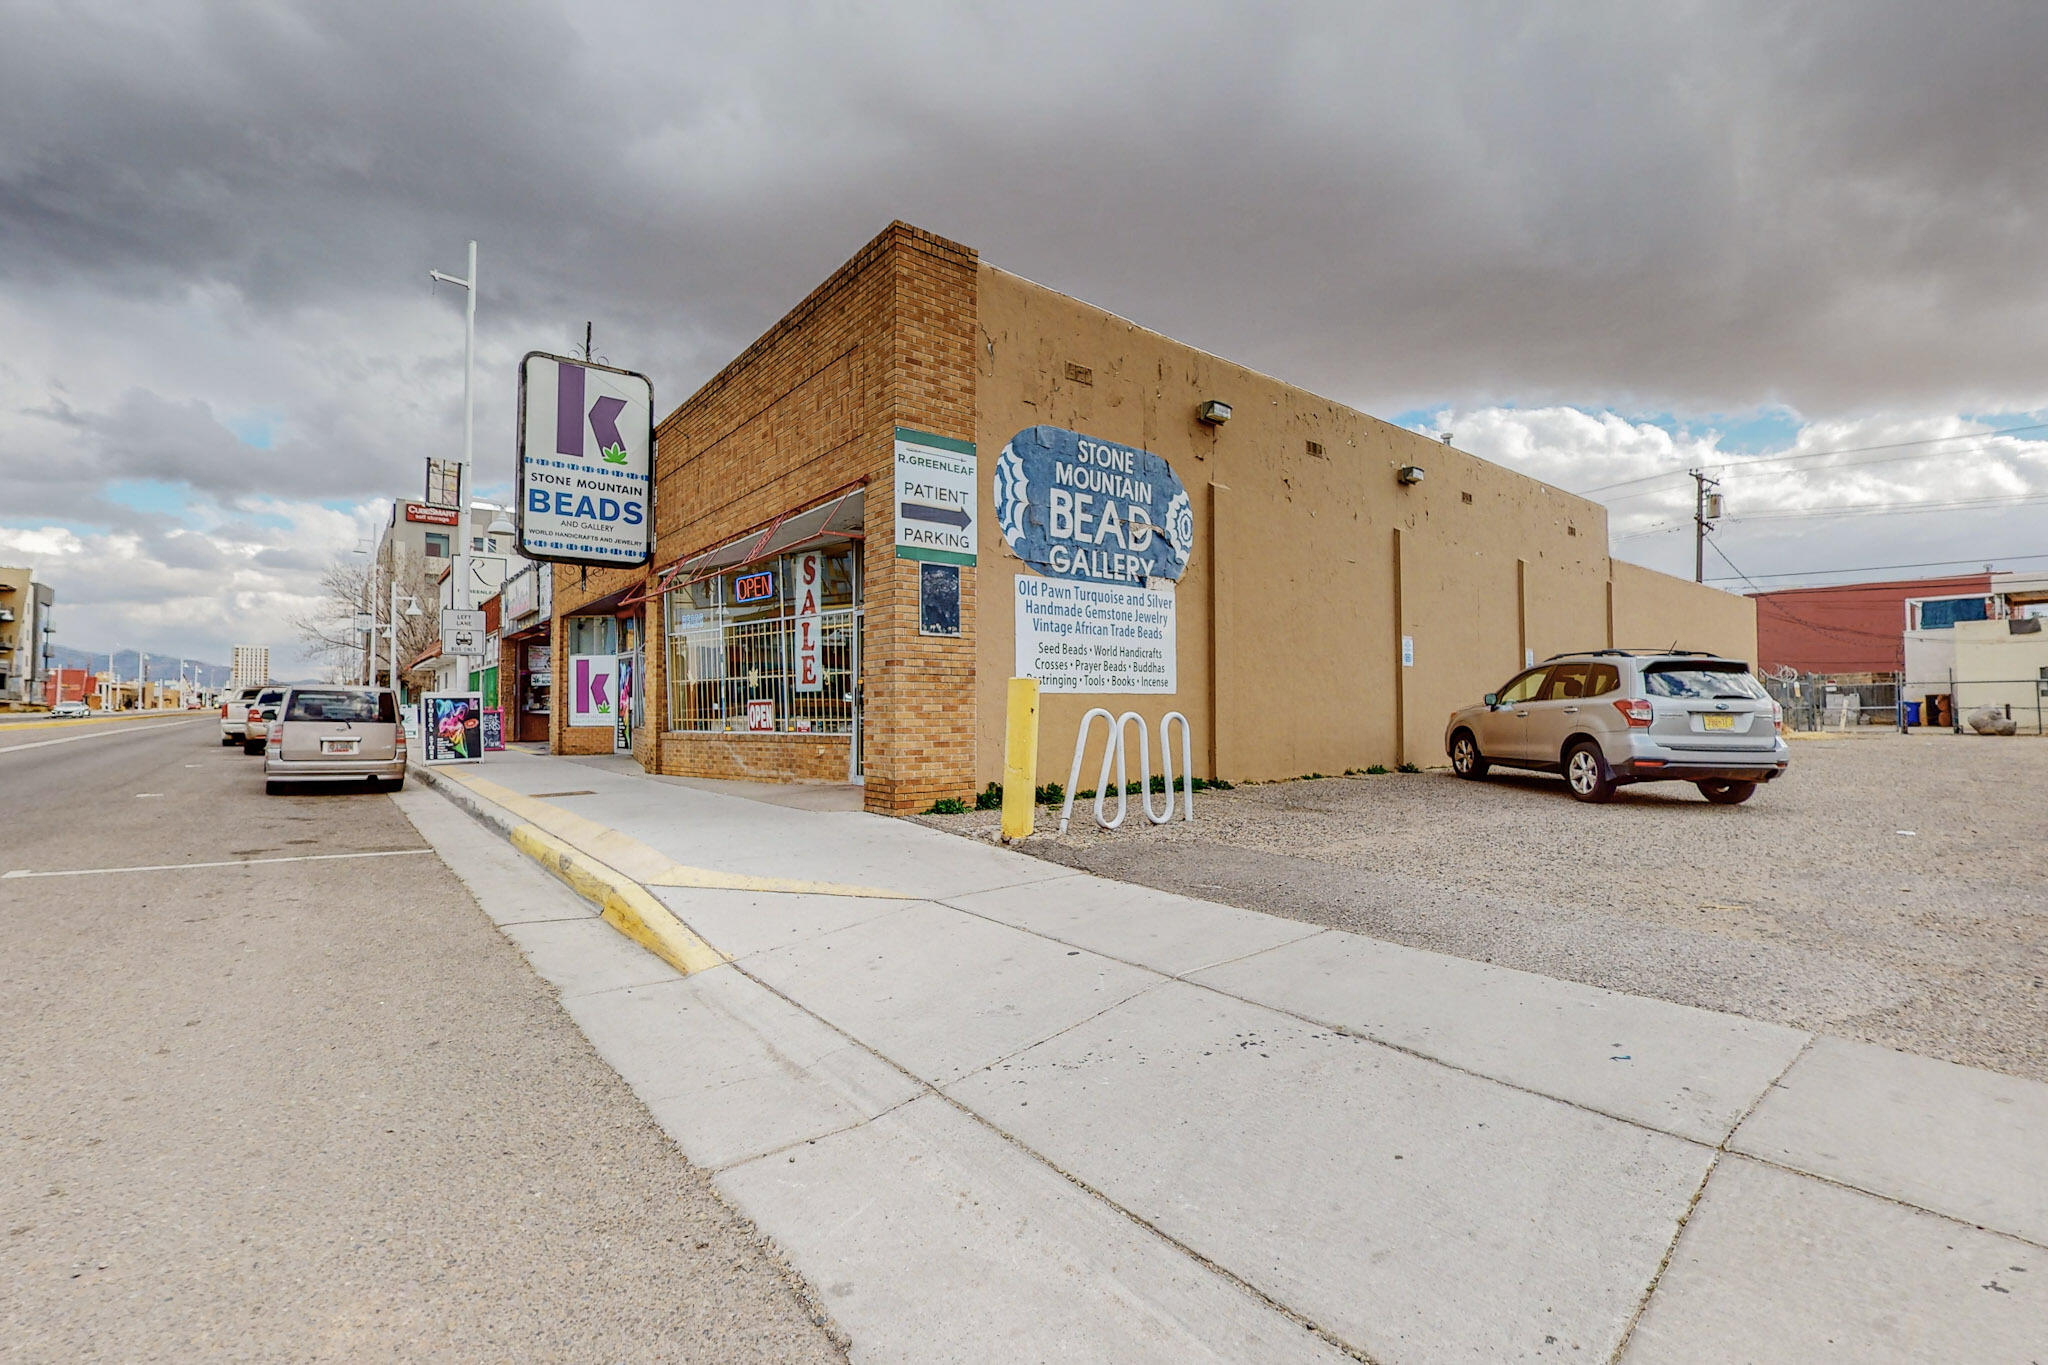 Nice retail location in Nob Hill with additional lot for parking. Ideal for retail or could be converted to a restaurant.TPO roof on the building.Vibrant area of Albuquerque.Owner occupies 1/2 of the​​‌​​​​‌​​‌‌​‌‌‌​​‌‌​‌‌‌​​‌‌​‌‌‌ building.